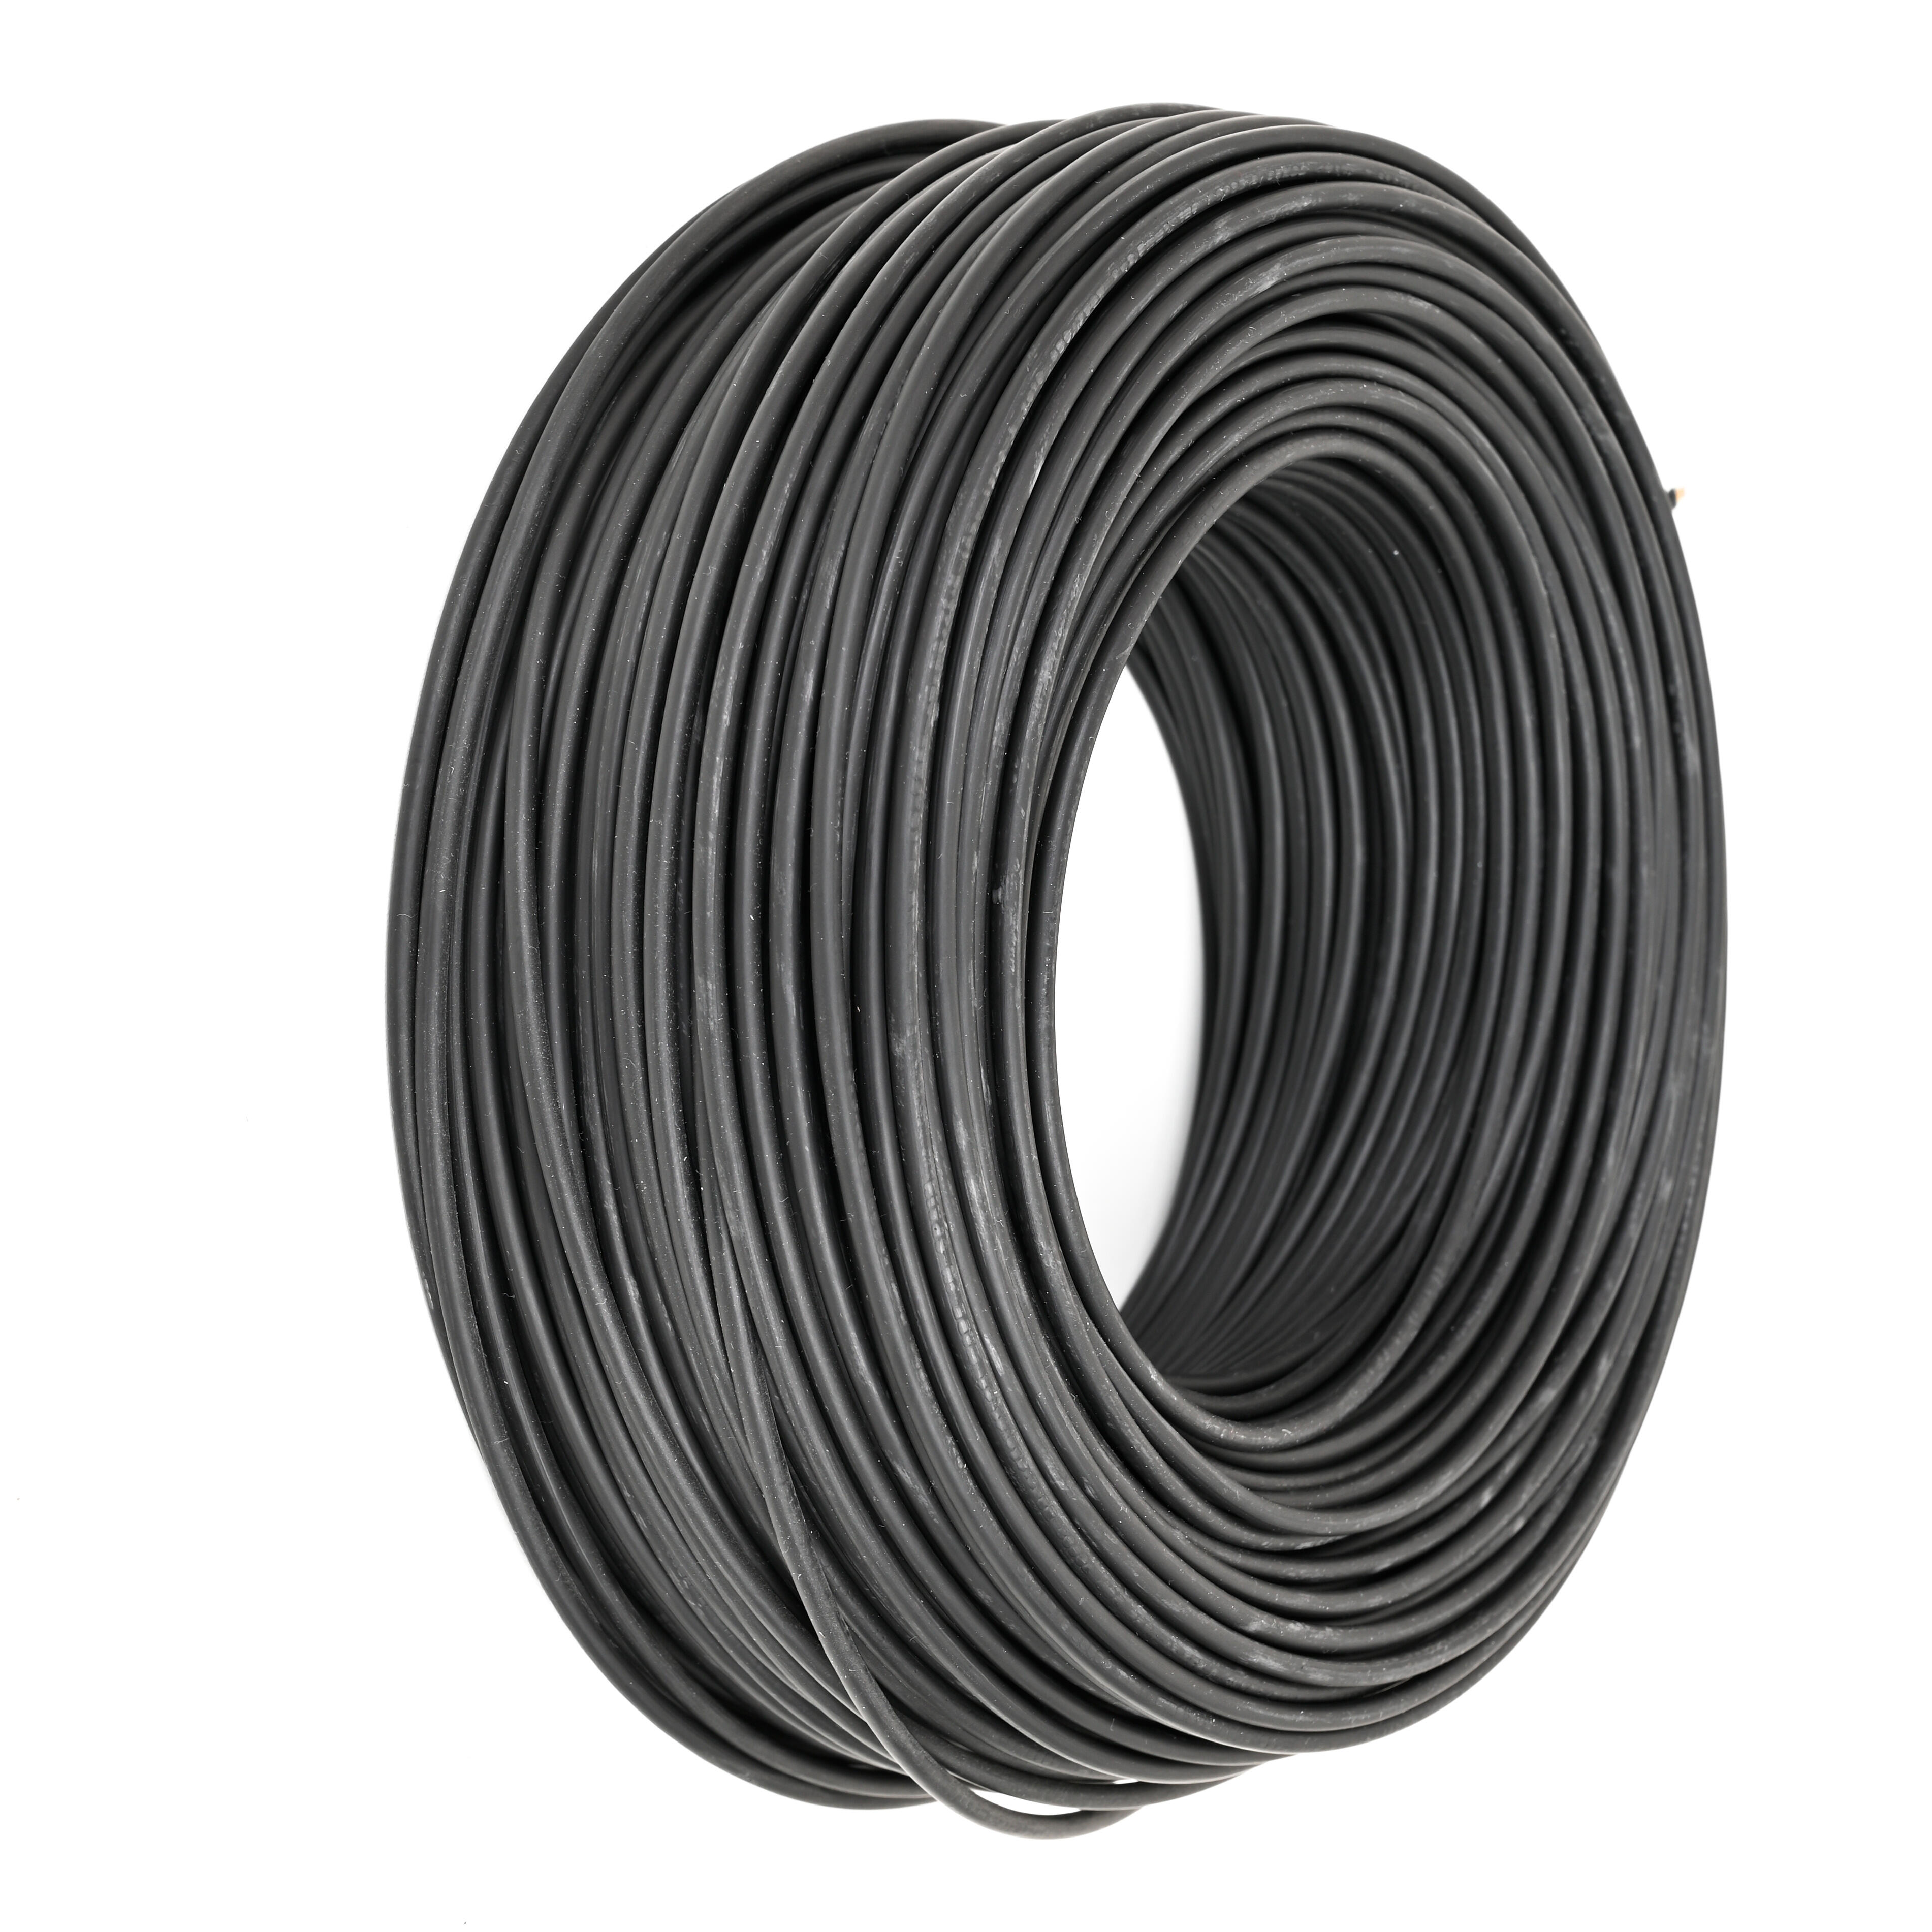 Cable h07z1-k negro 1,5 mm² 200 metros